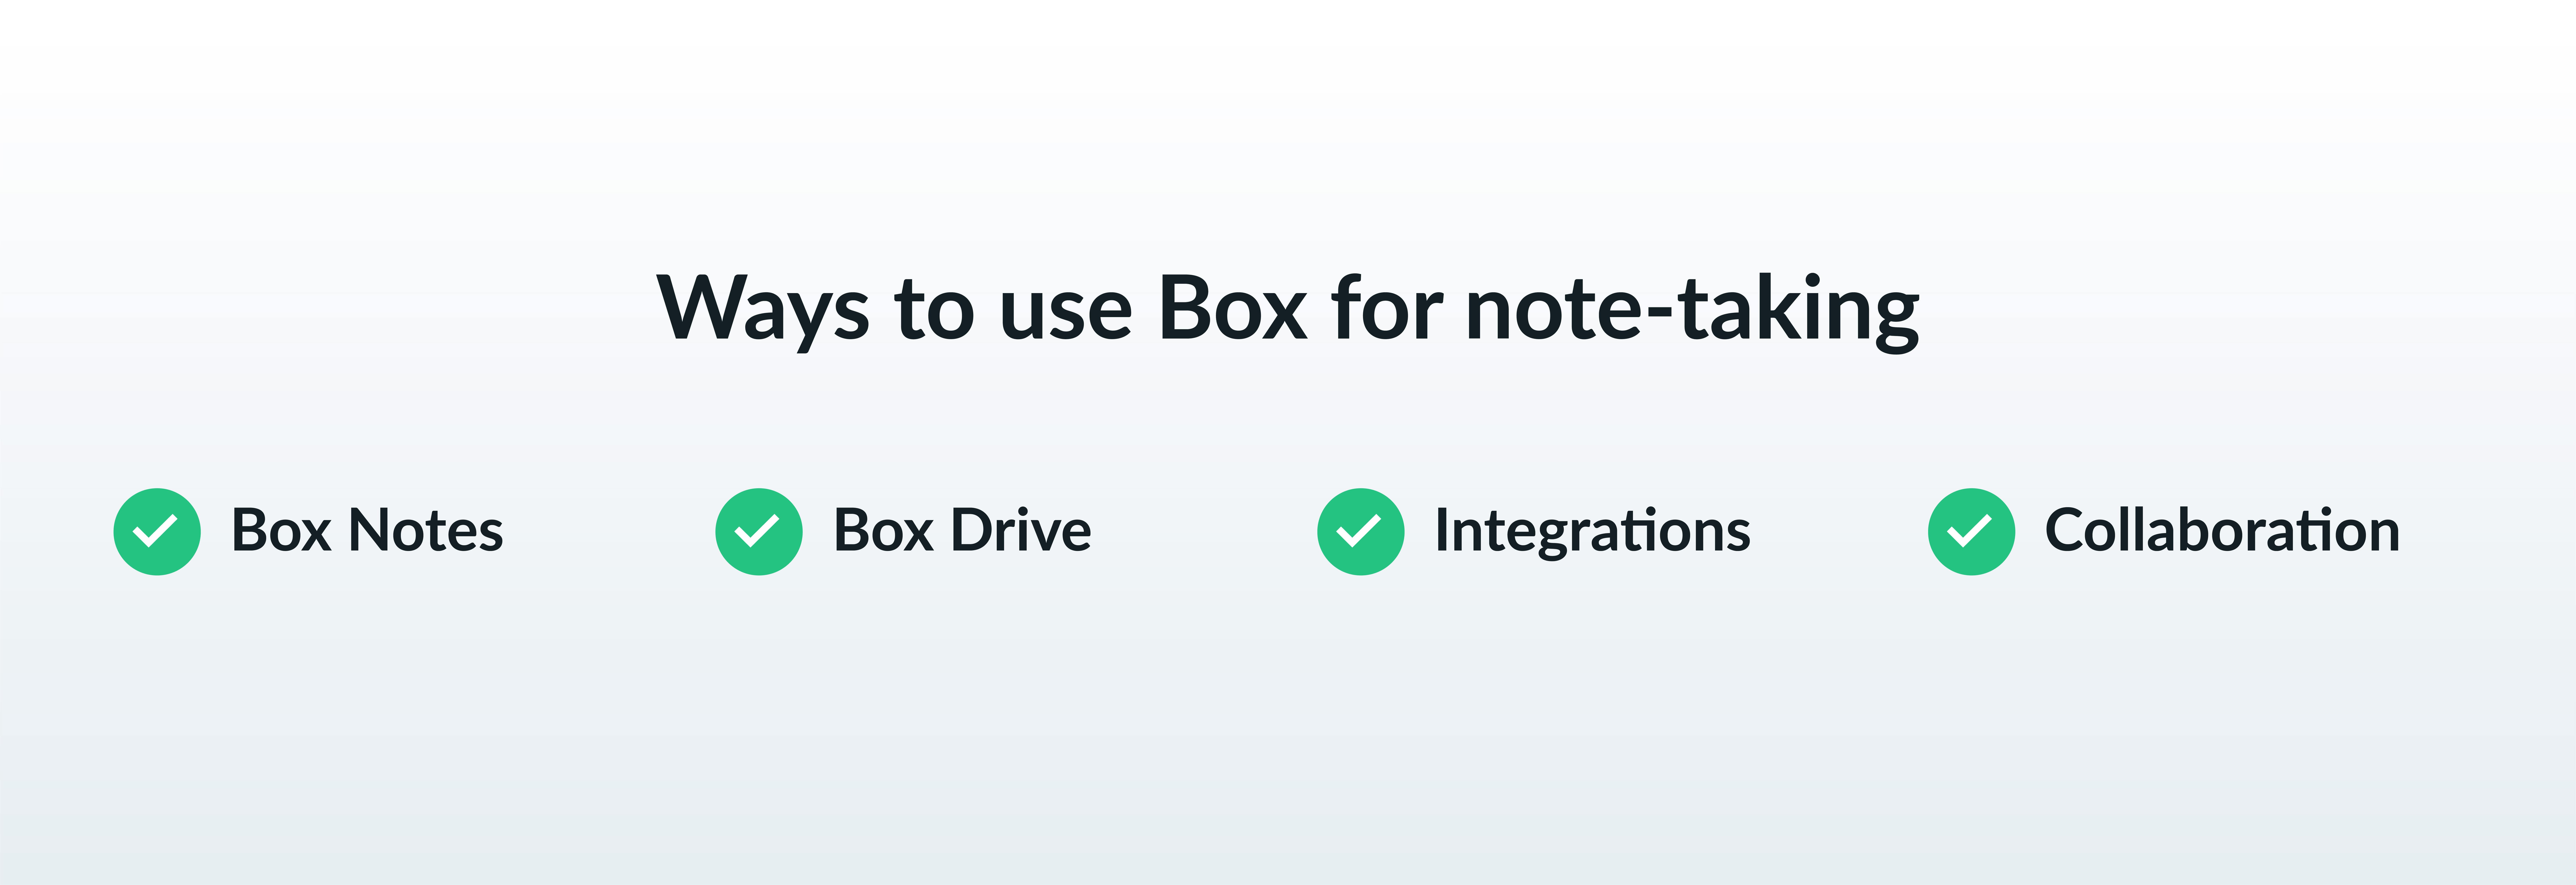 Ways to use Box for note-taking - Box Notes, Box Drive, Integrations, Collaboration